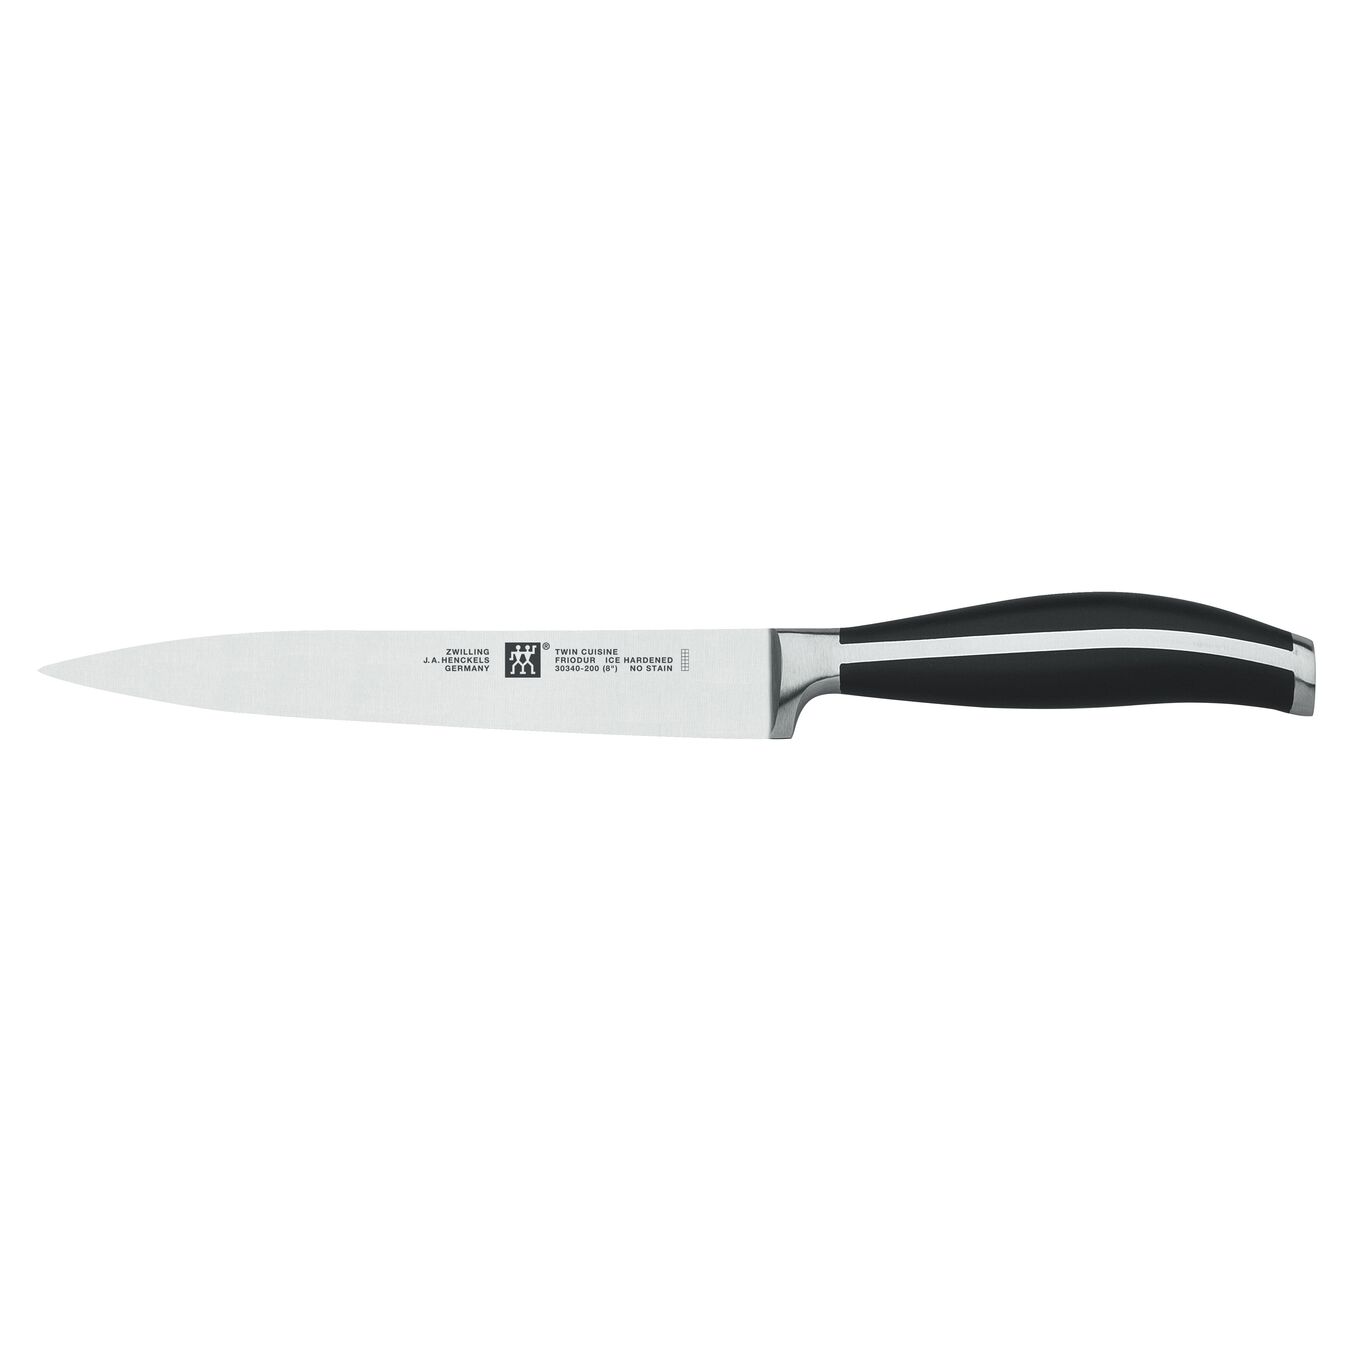 8 inch Carving knife - Visual Imperfections,,large 2